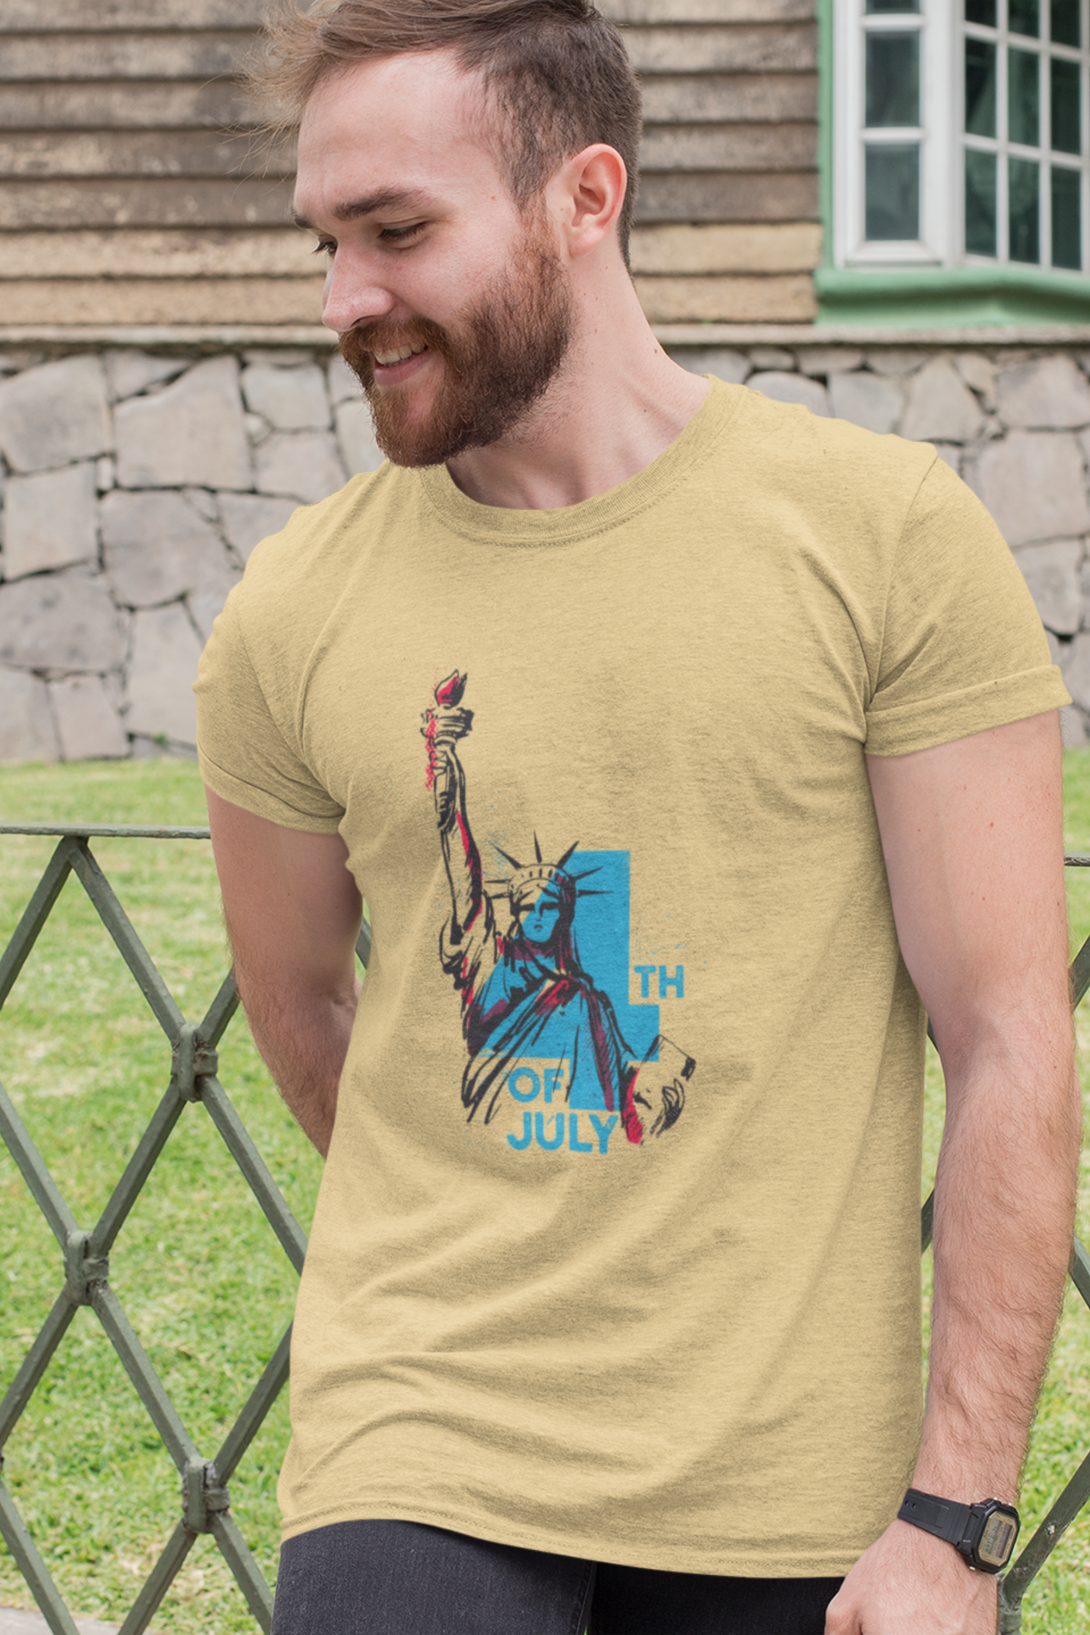 Statue Of Liberty Vintage Printed T-Shirt For Men - WowWaves - 2